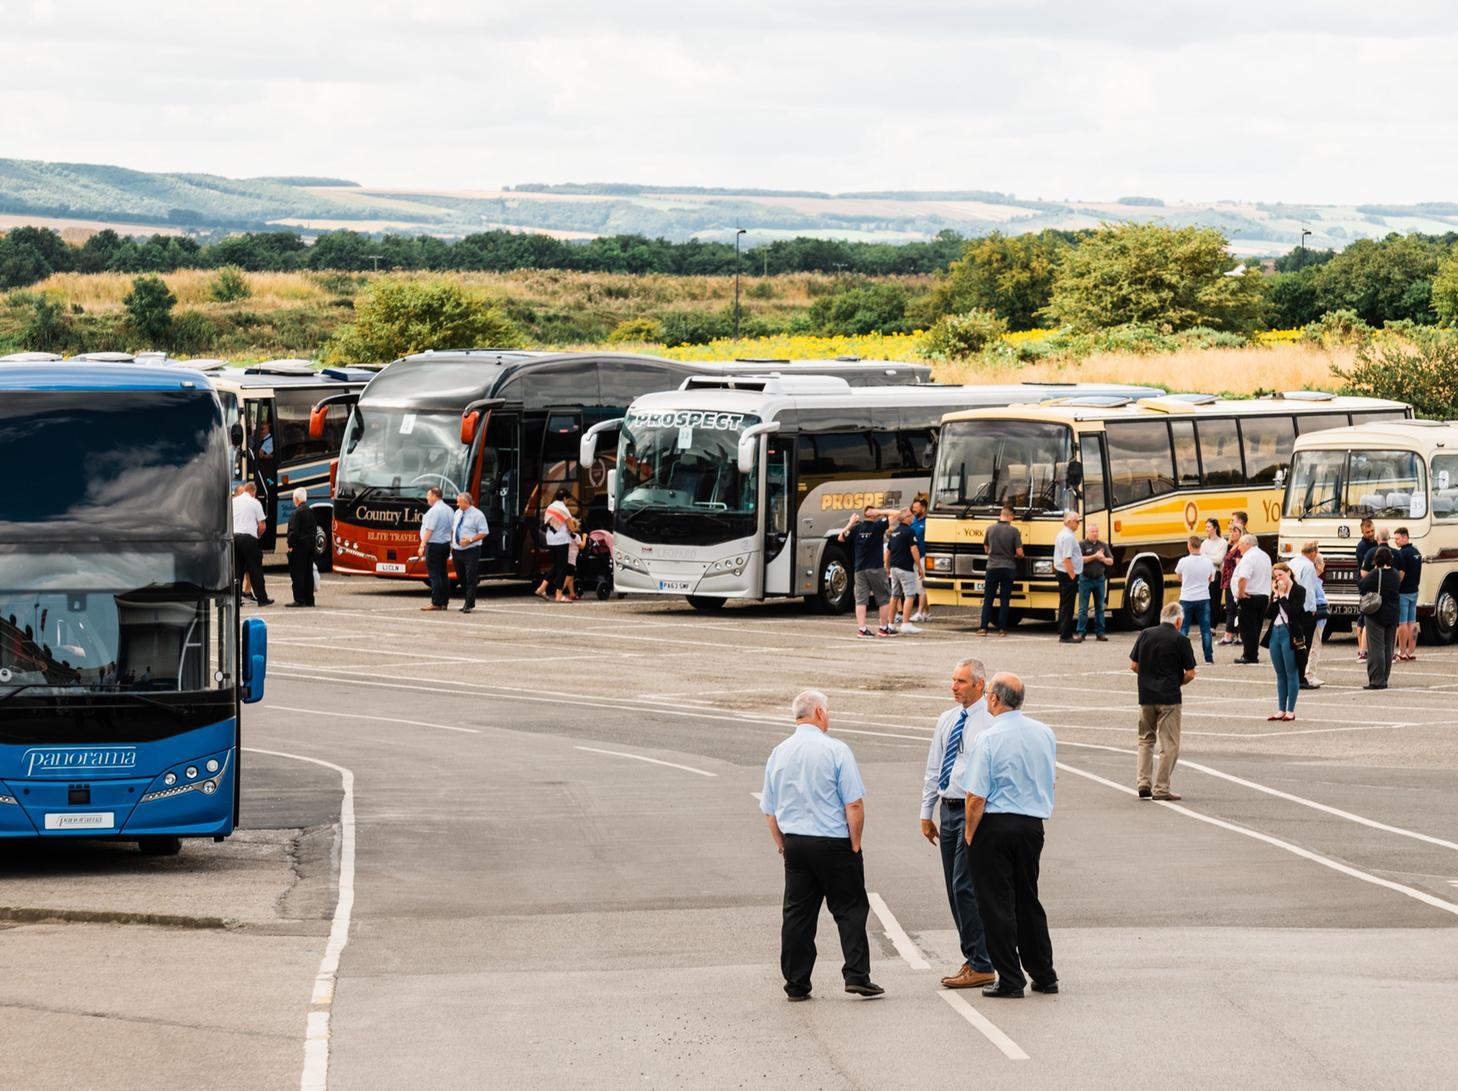 One of Scarborough's biggest firms - Plaxton - gained new ownership after its parent company Alexander Dennis was bought in a 320million takeover.